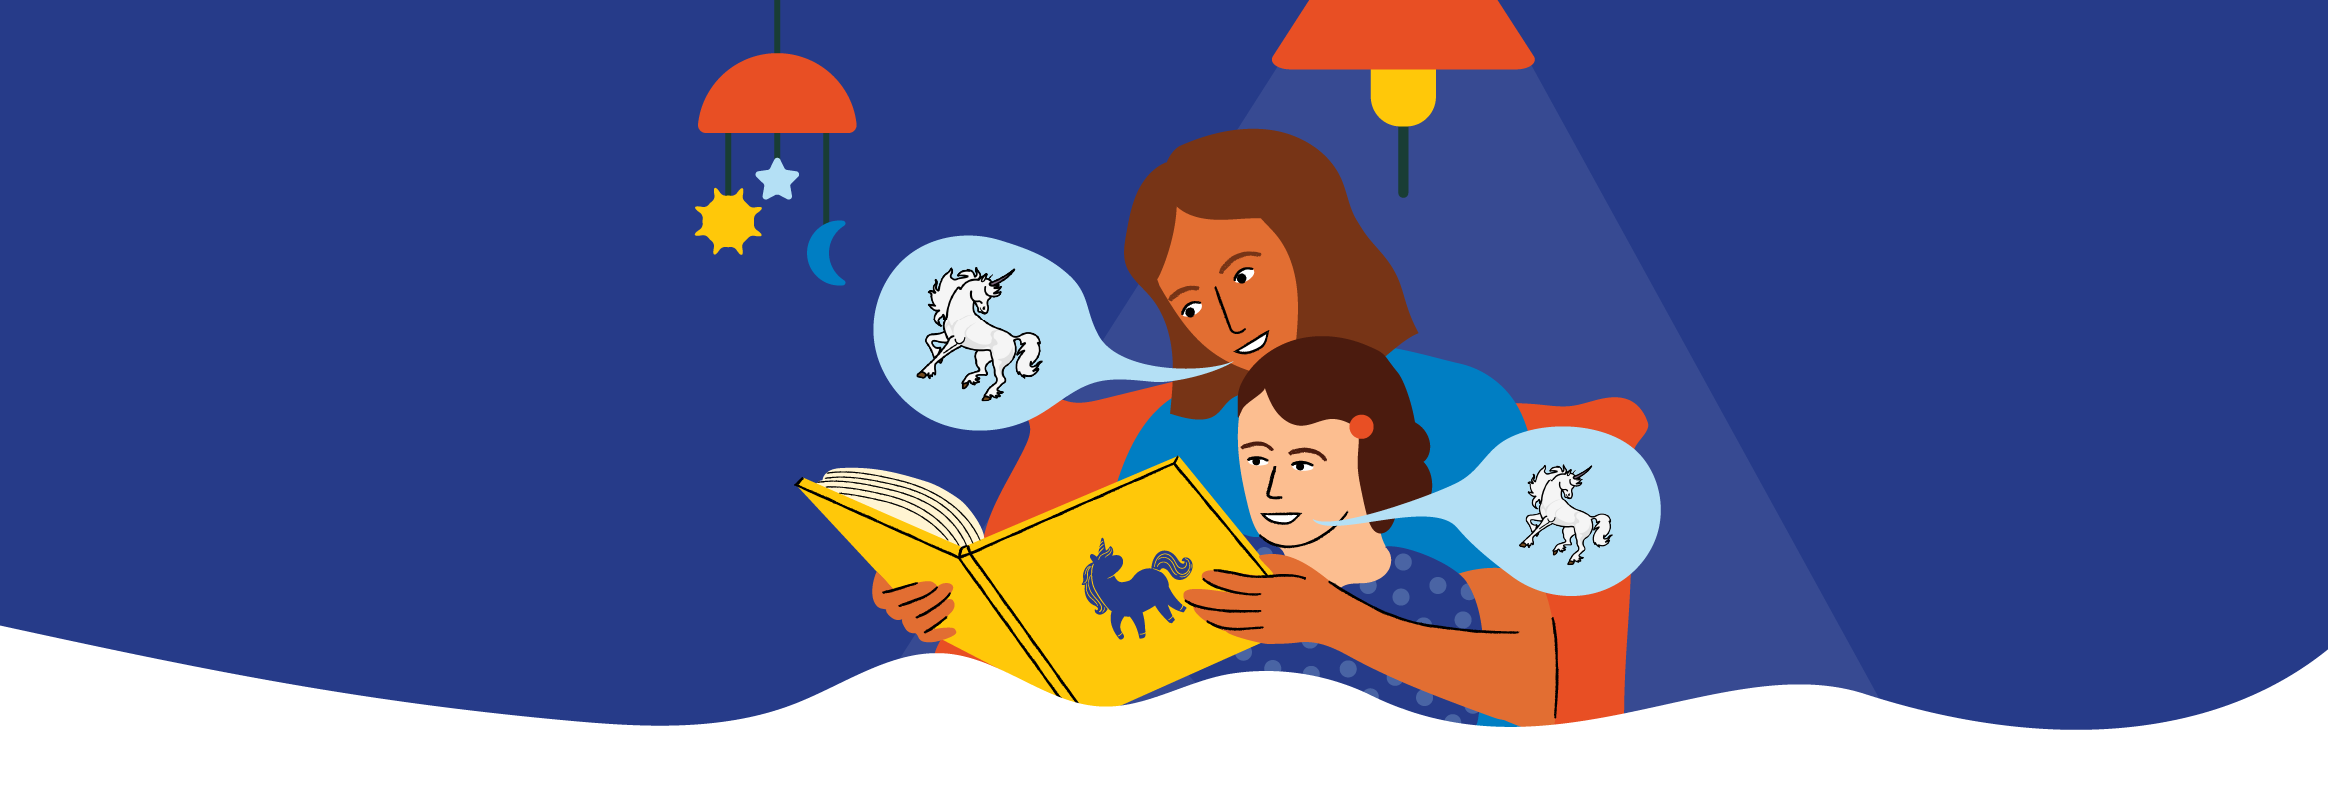 An adult reading a picture book with a unicorn on the cover. Two speech bubbles with unicorns coming from the adult's and child's mouth.